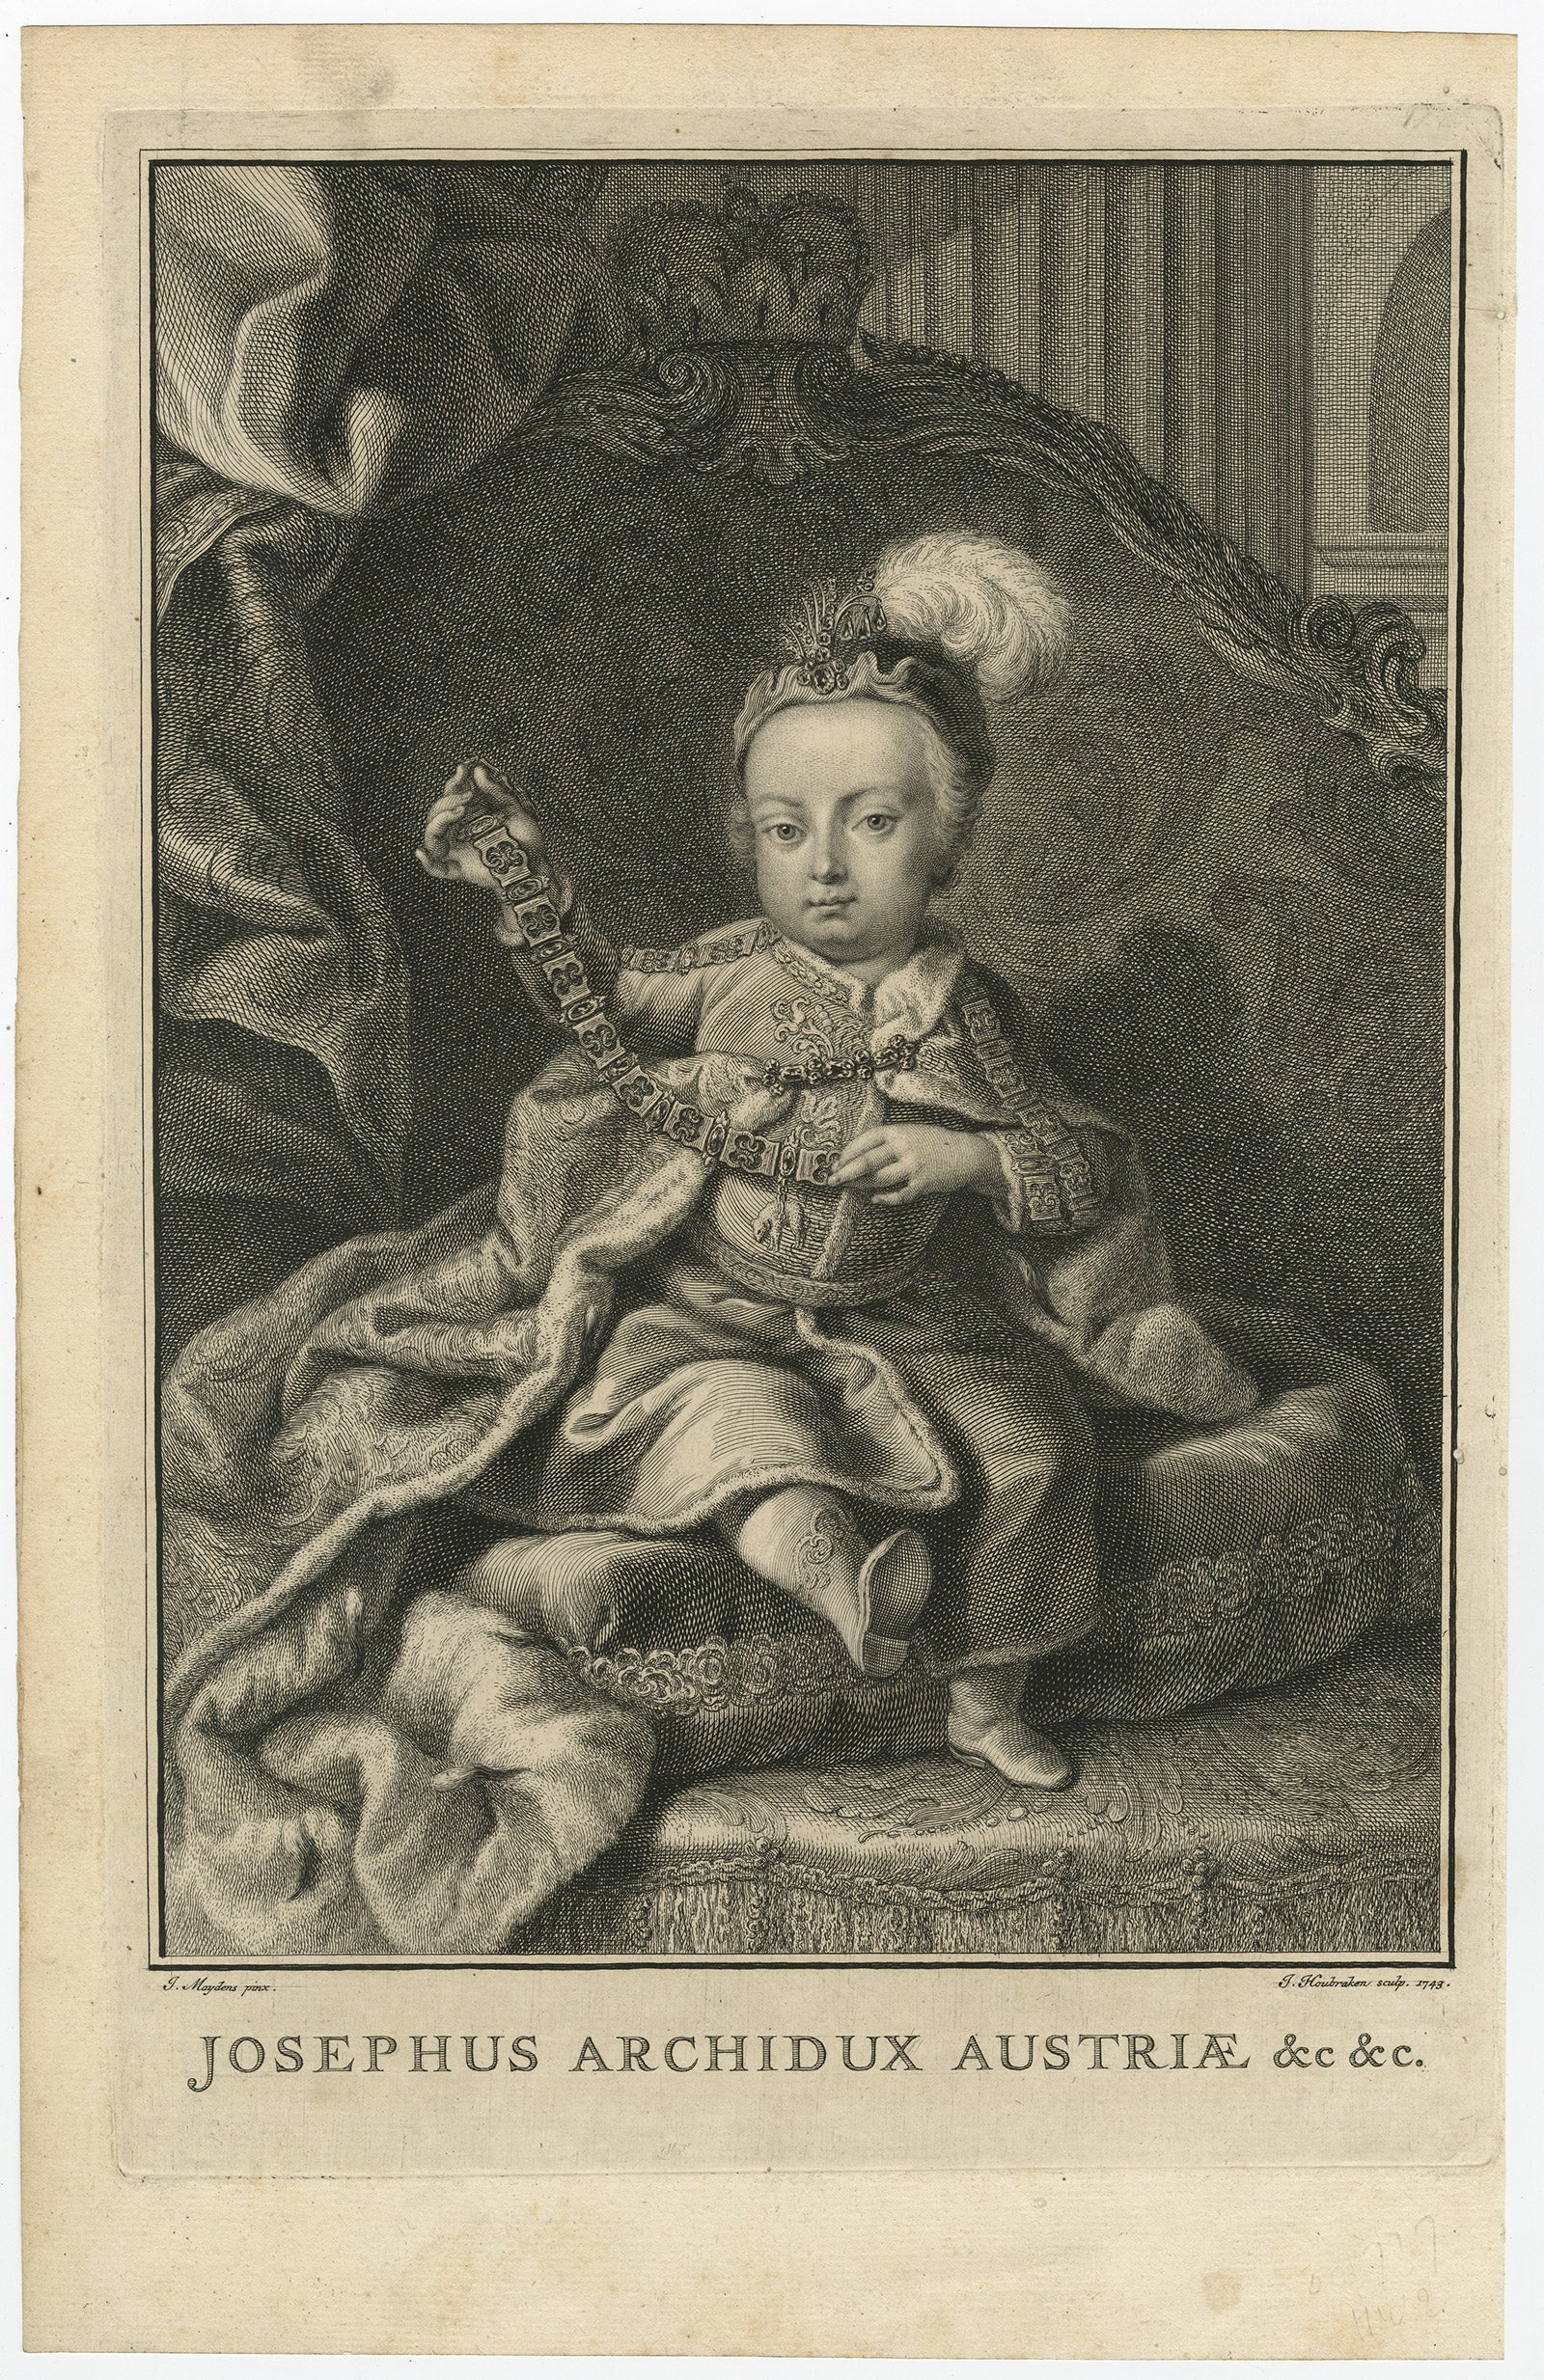 Antique print, titled: 'Josephus Archidux Austriae etc.' 

This original antique plate shows a portrait of Joseph I (26 July 1678 – 17 April 1711), Holy Roman Emperor from 1705 until his death in 1711. Source unknown, to be determined.

Joseph I